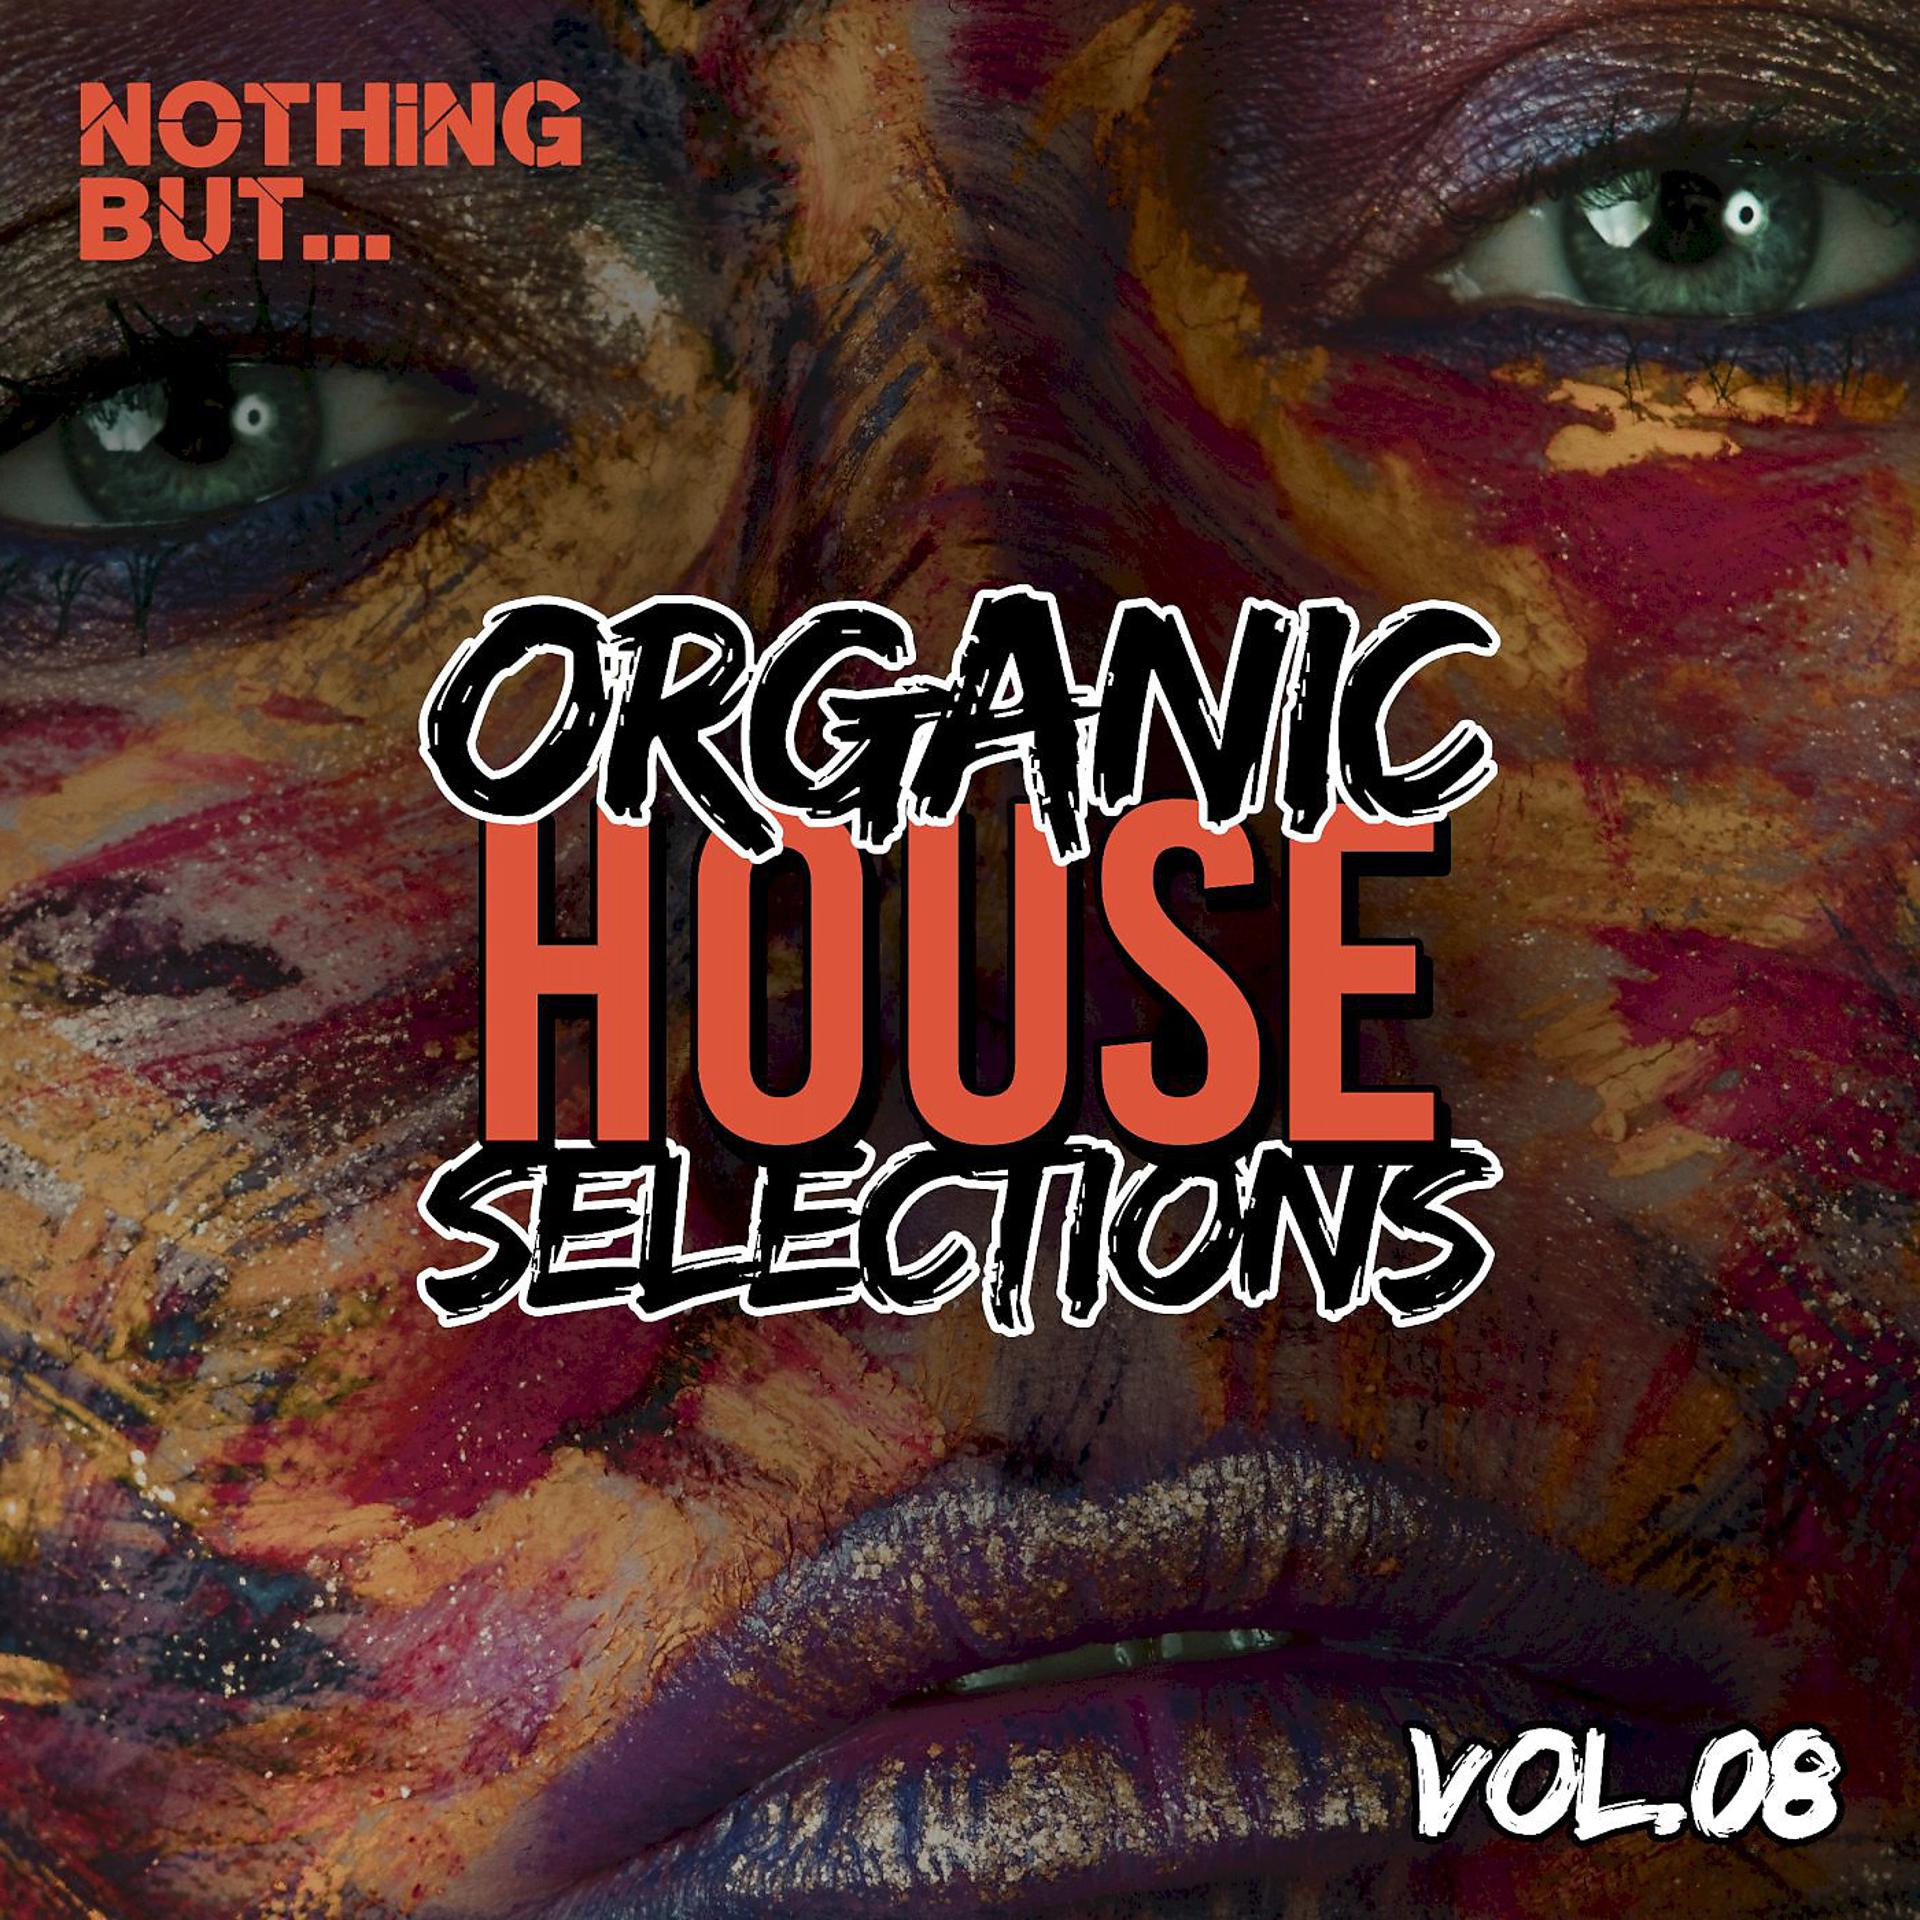 Постер альбома Nothing But... Organic House Selections, Vol. 08